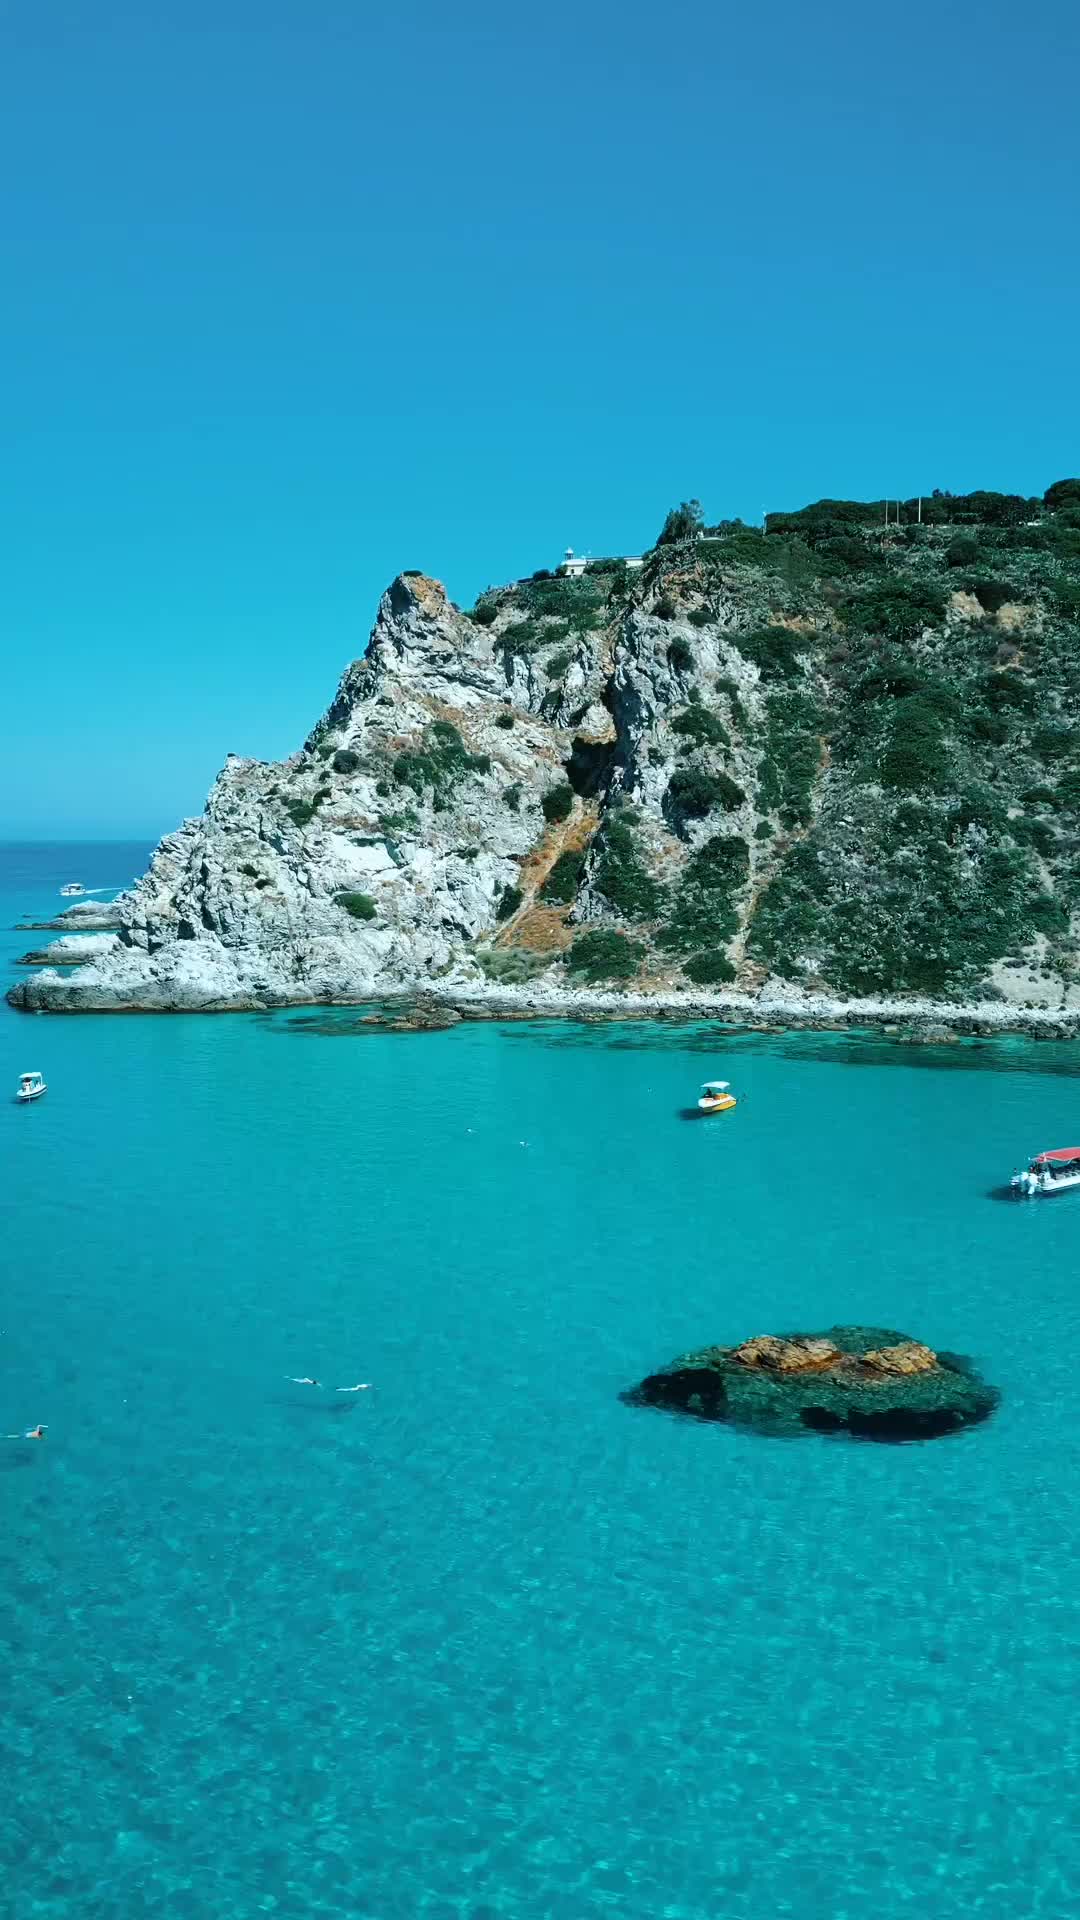 Discover the Beauty of Grotticelle in Capo Vaticano